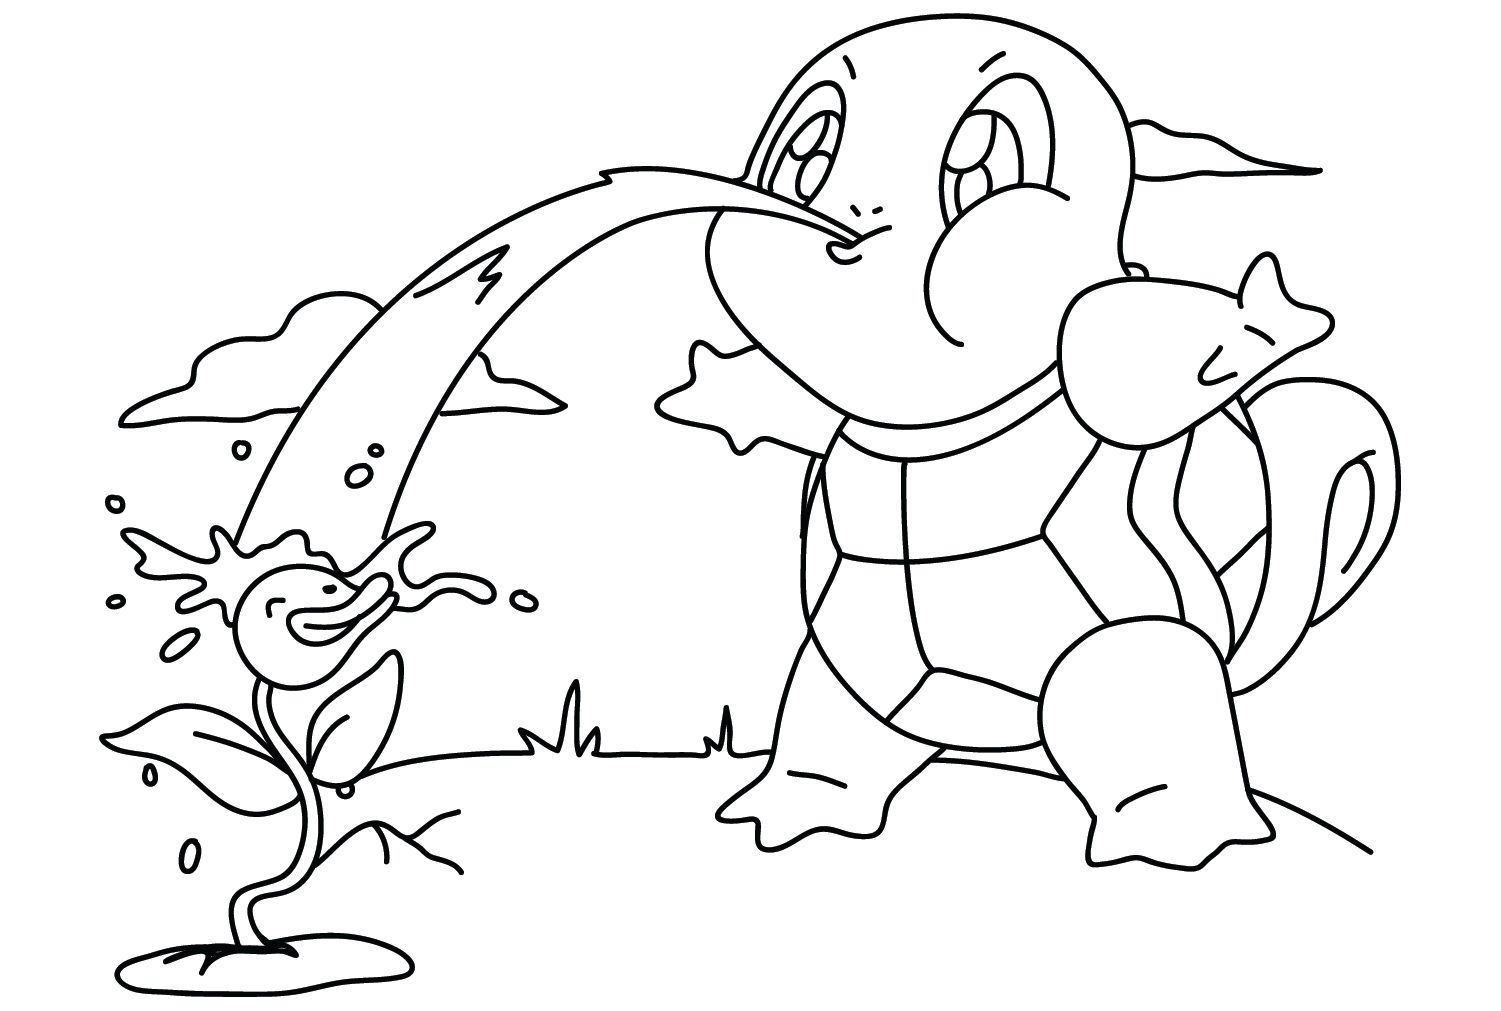 Squirtle Coloring Pages to Printable from Squirtle